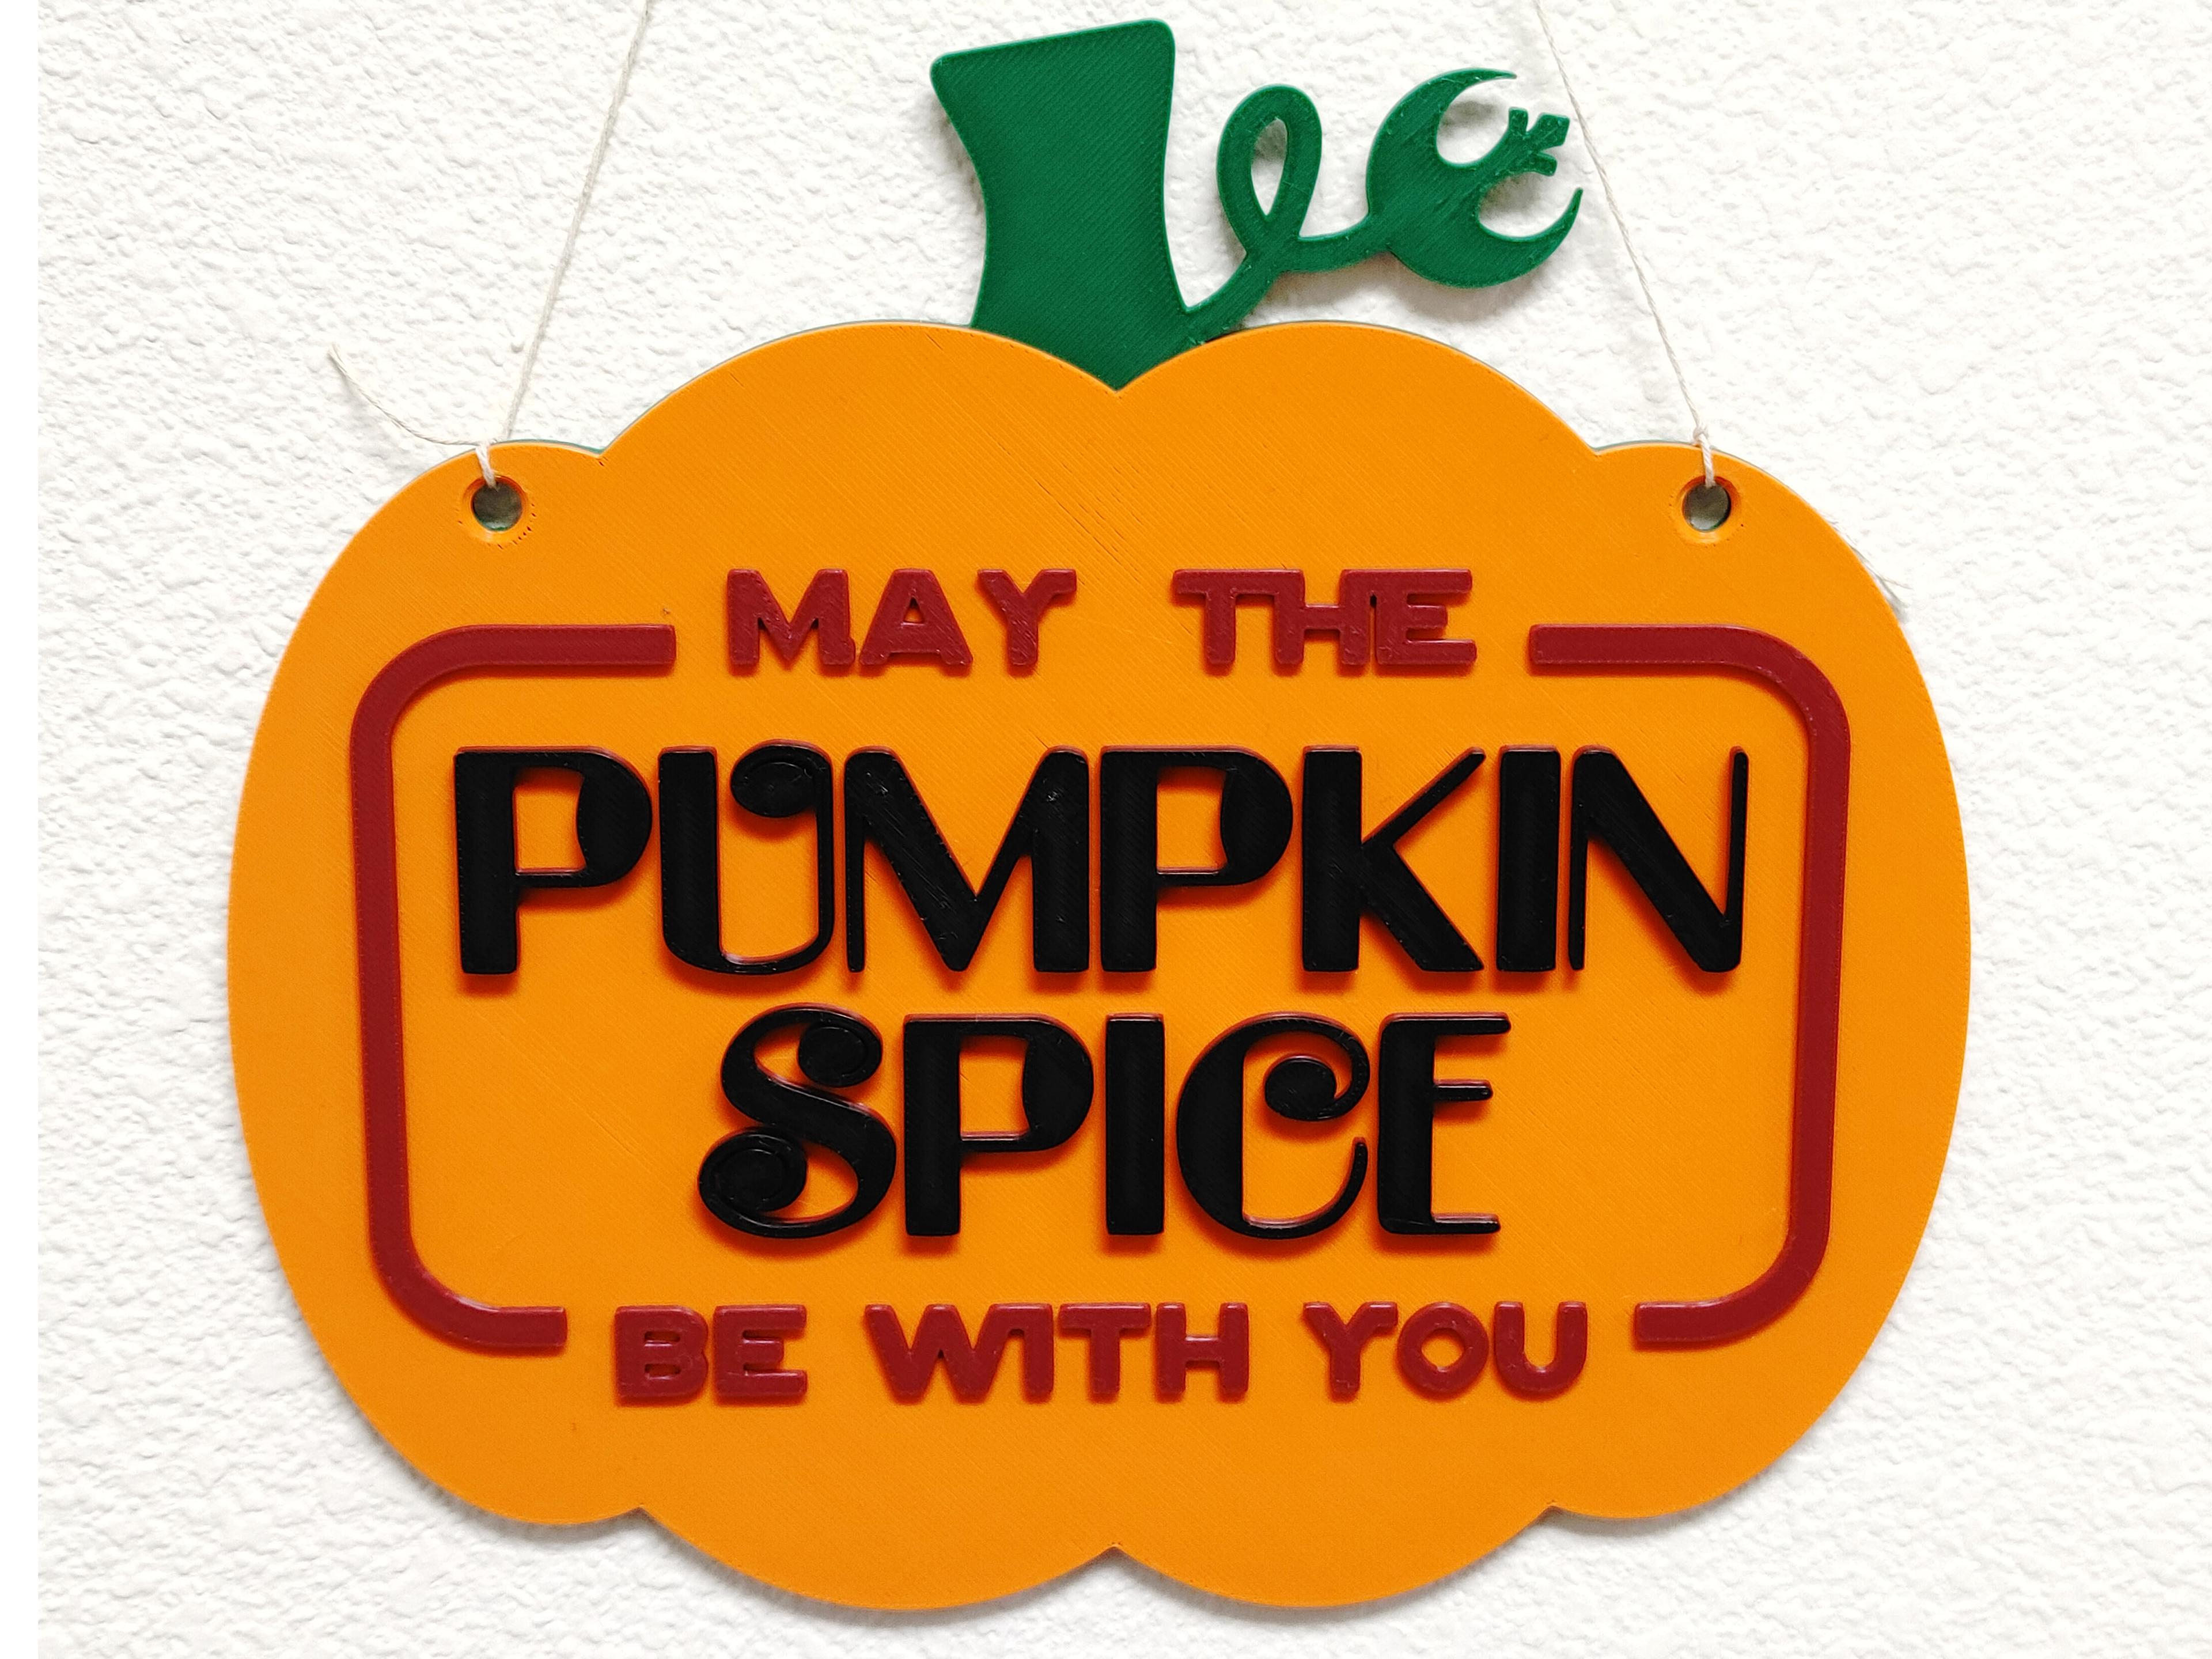 Star Wars May The Pumpkin Spice Be With You Decorative Sign 3d model